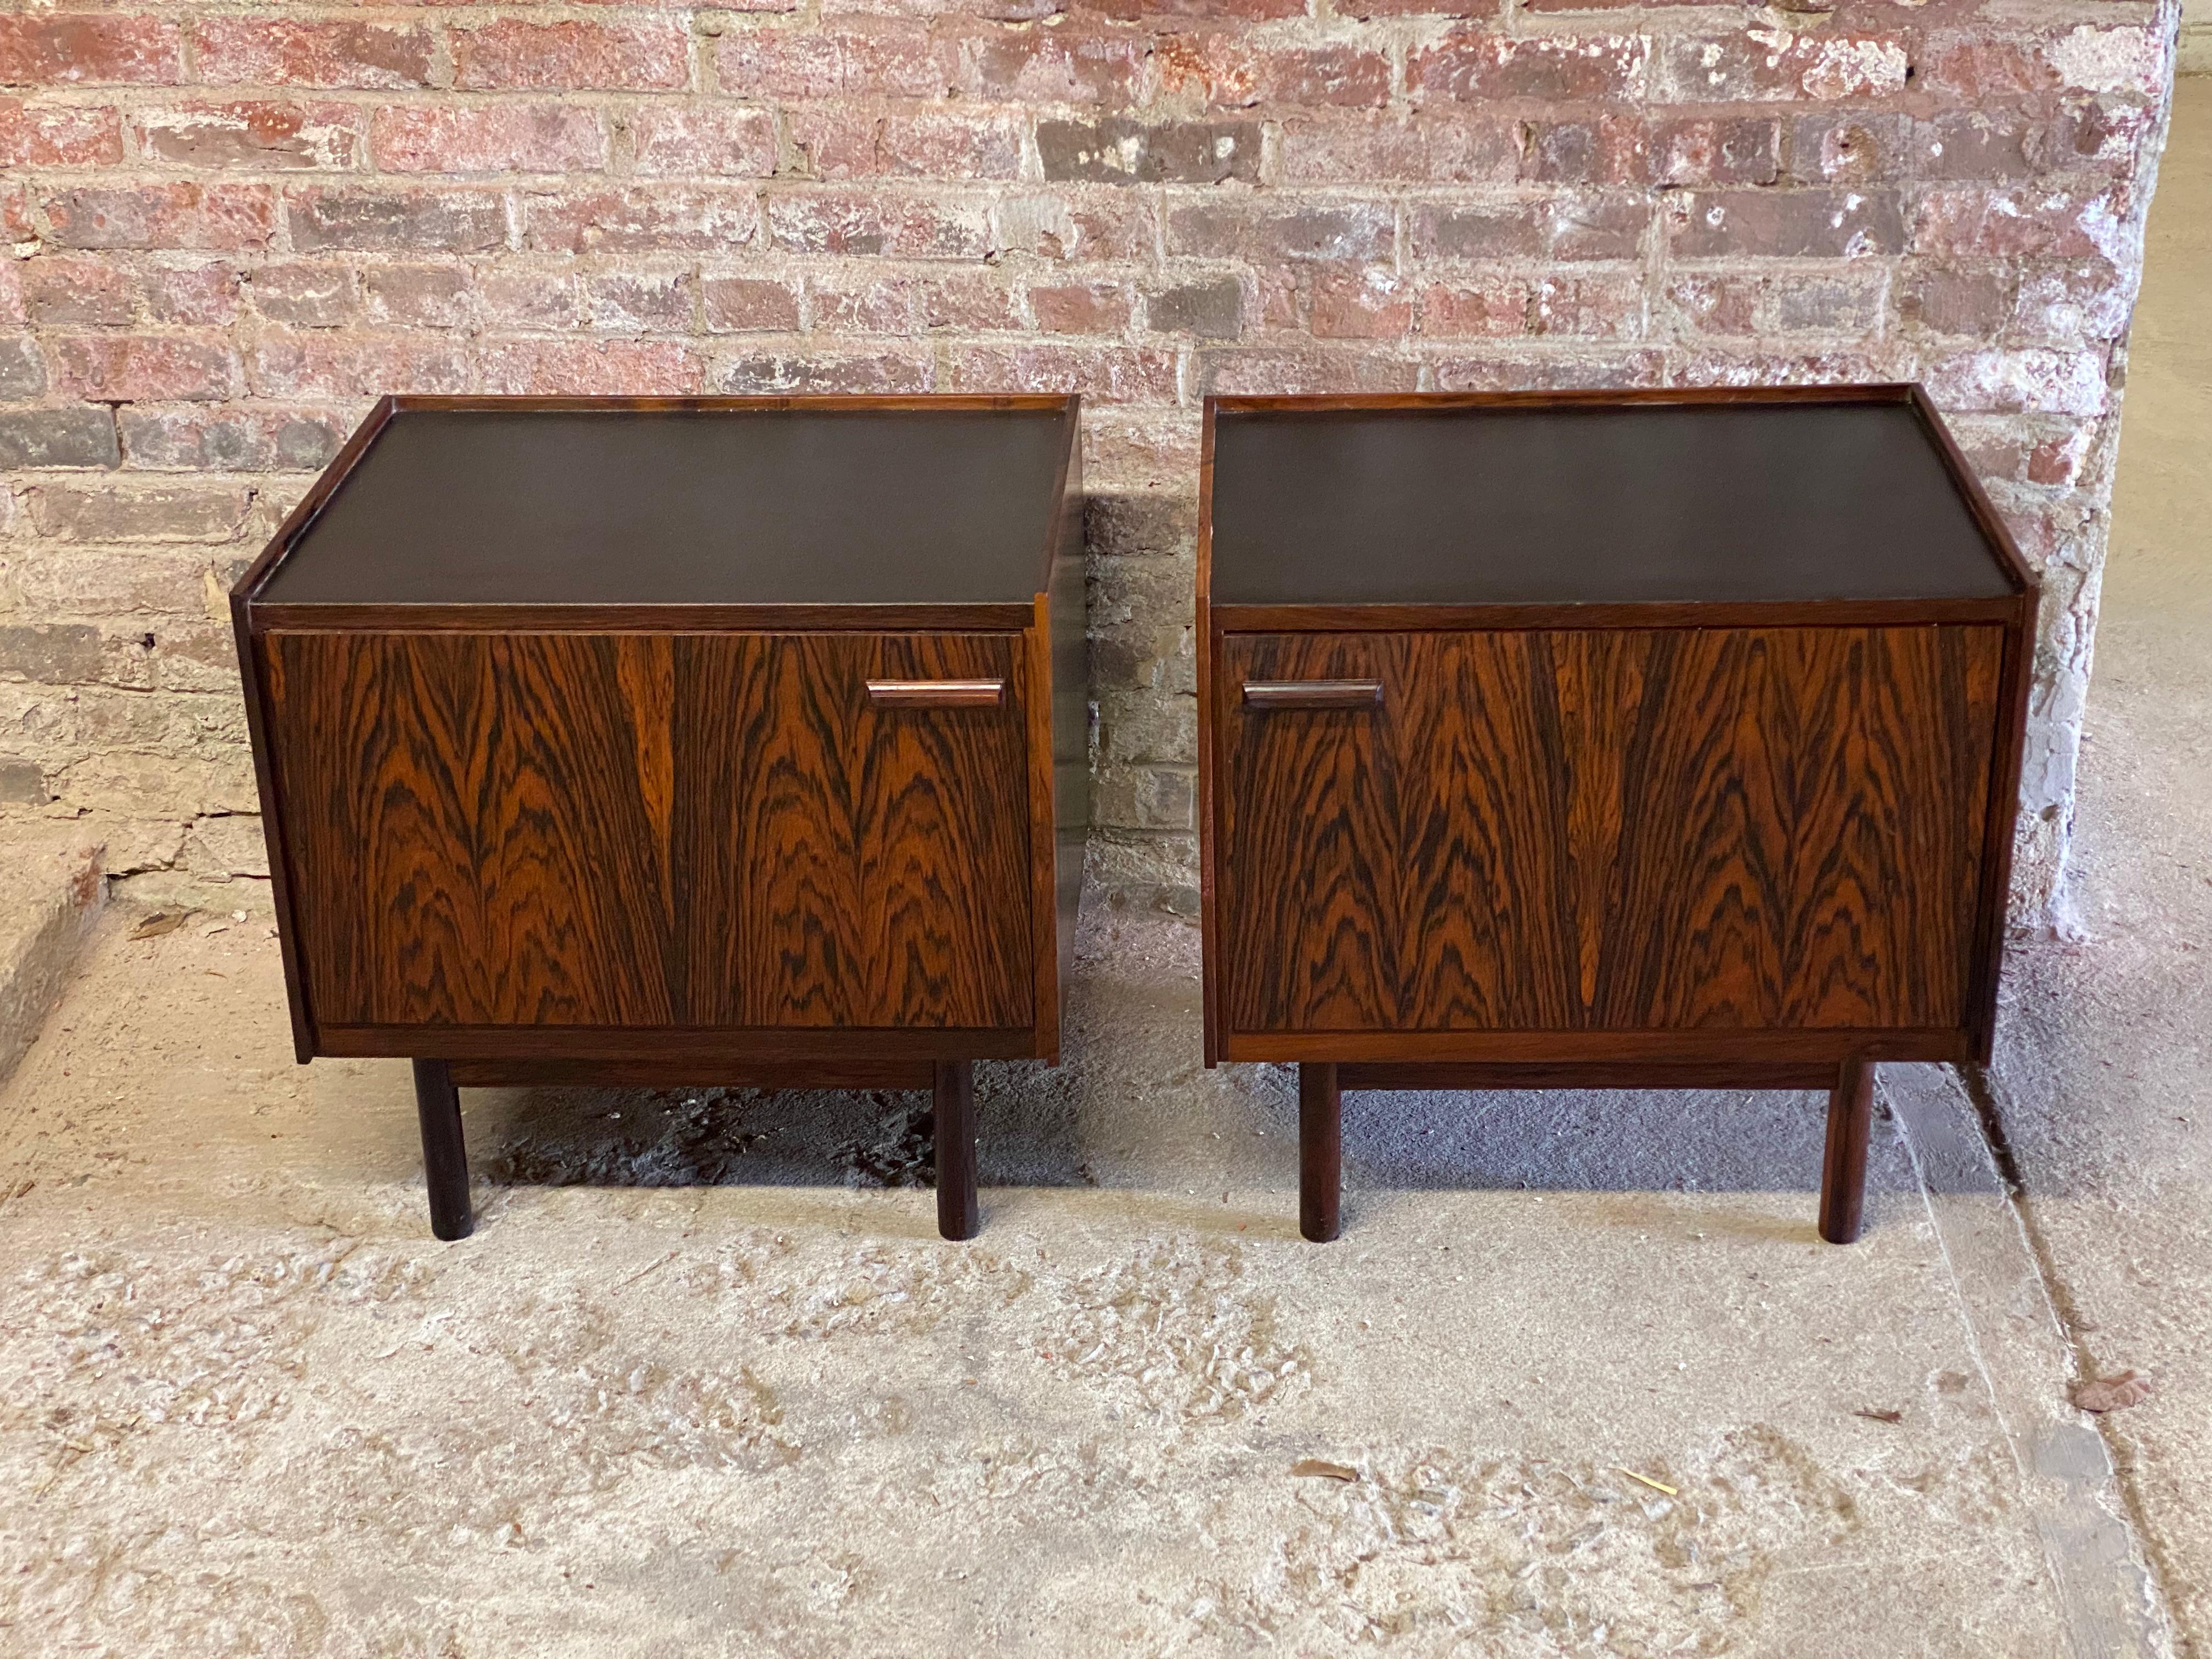 A fine pair of rosewood and black laminate Danish Modern night stands. Beautifully figured veneered cases with solid rosewood legs and handles. Light wood interiors with a removable shelf. Removable legs. One example bares the black enamel Danish